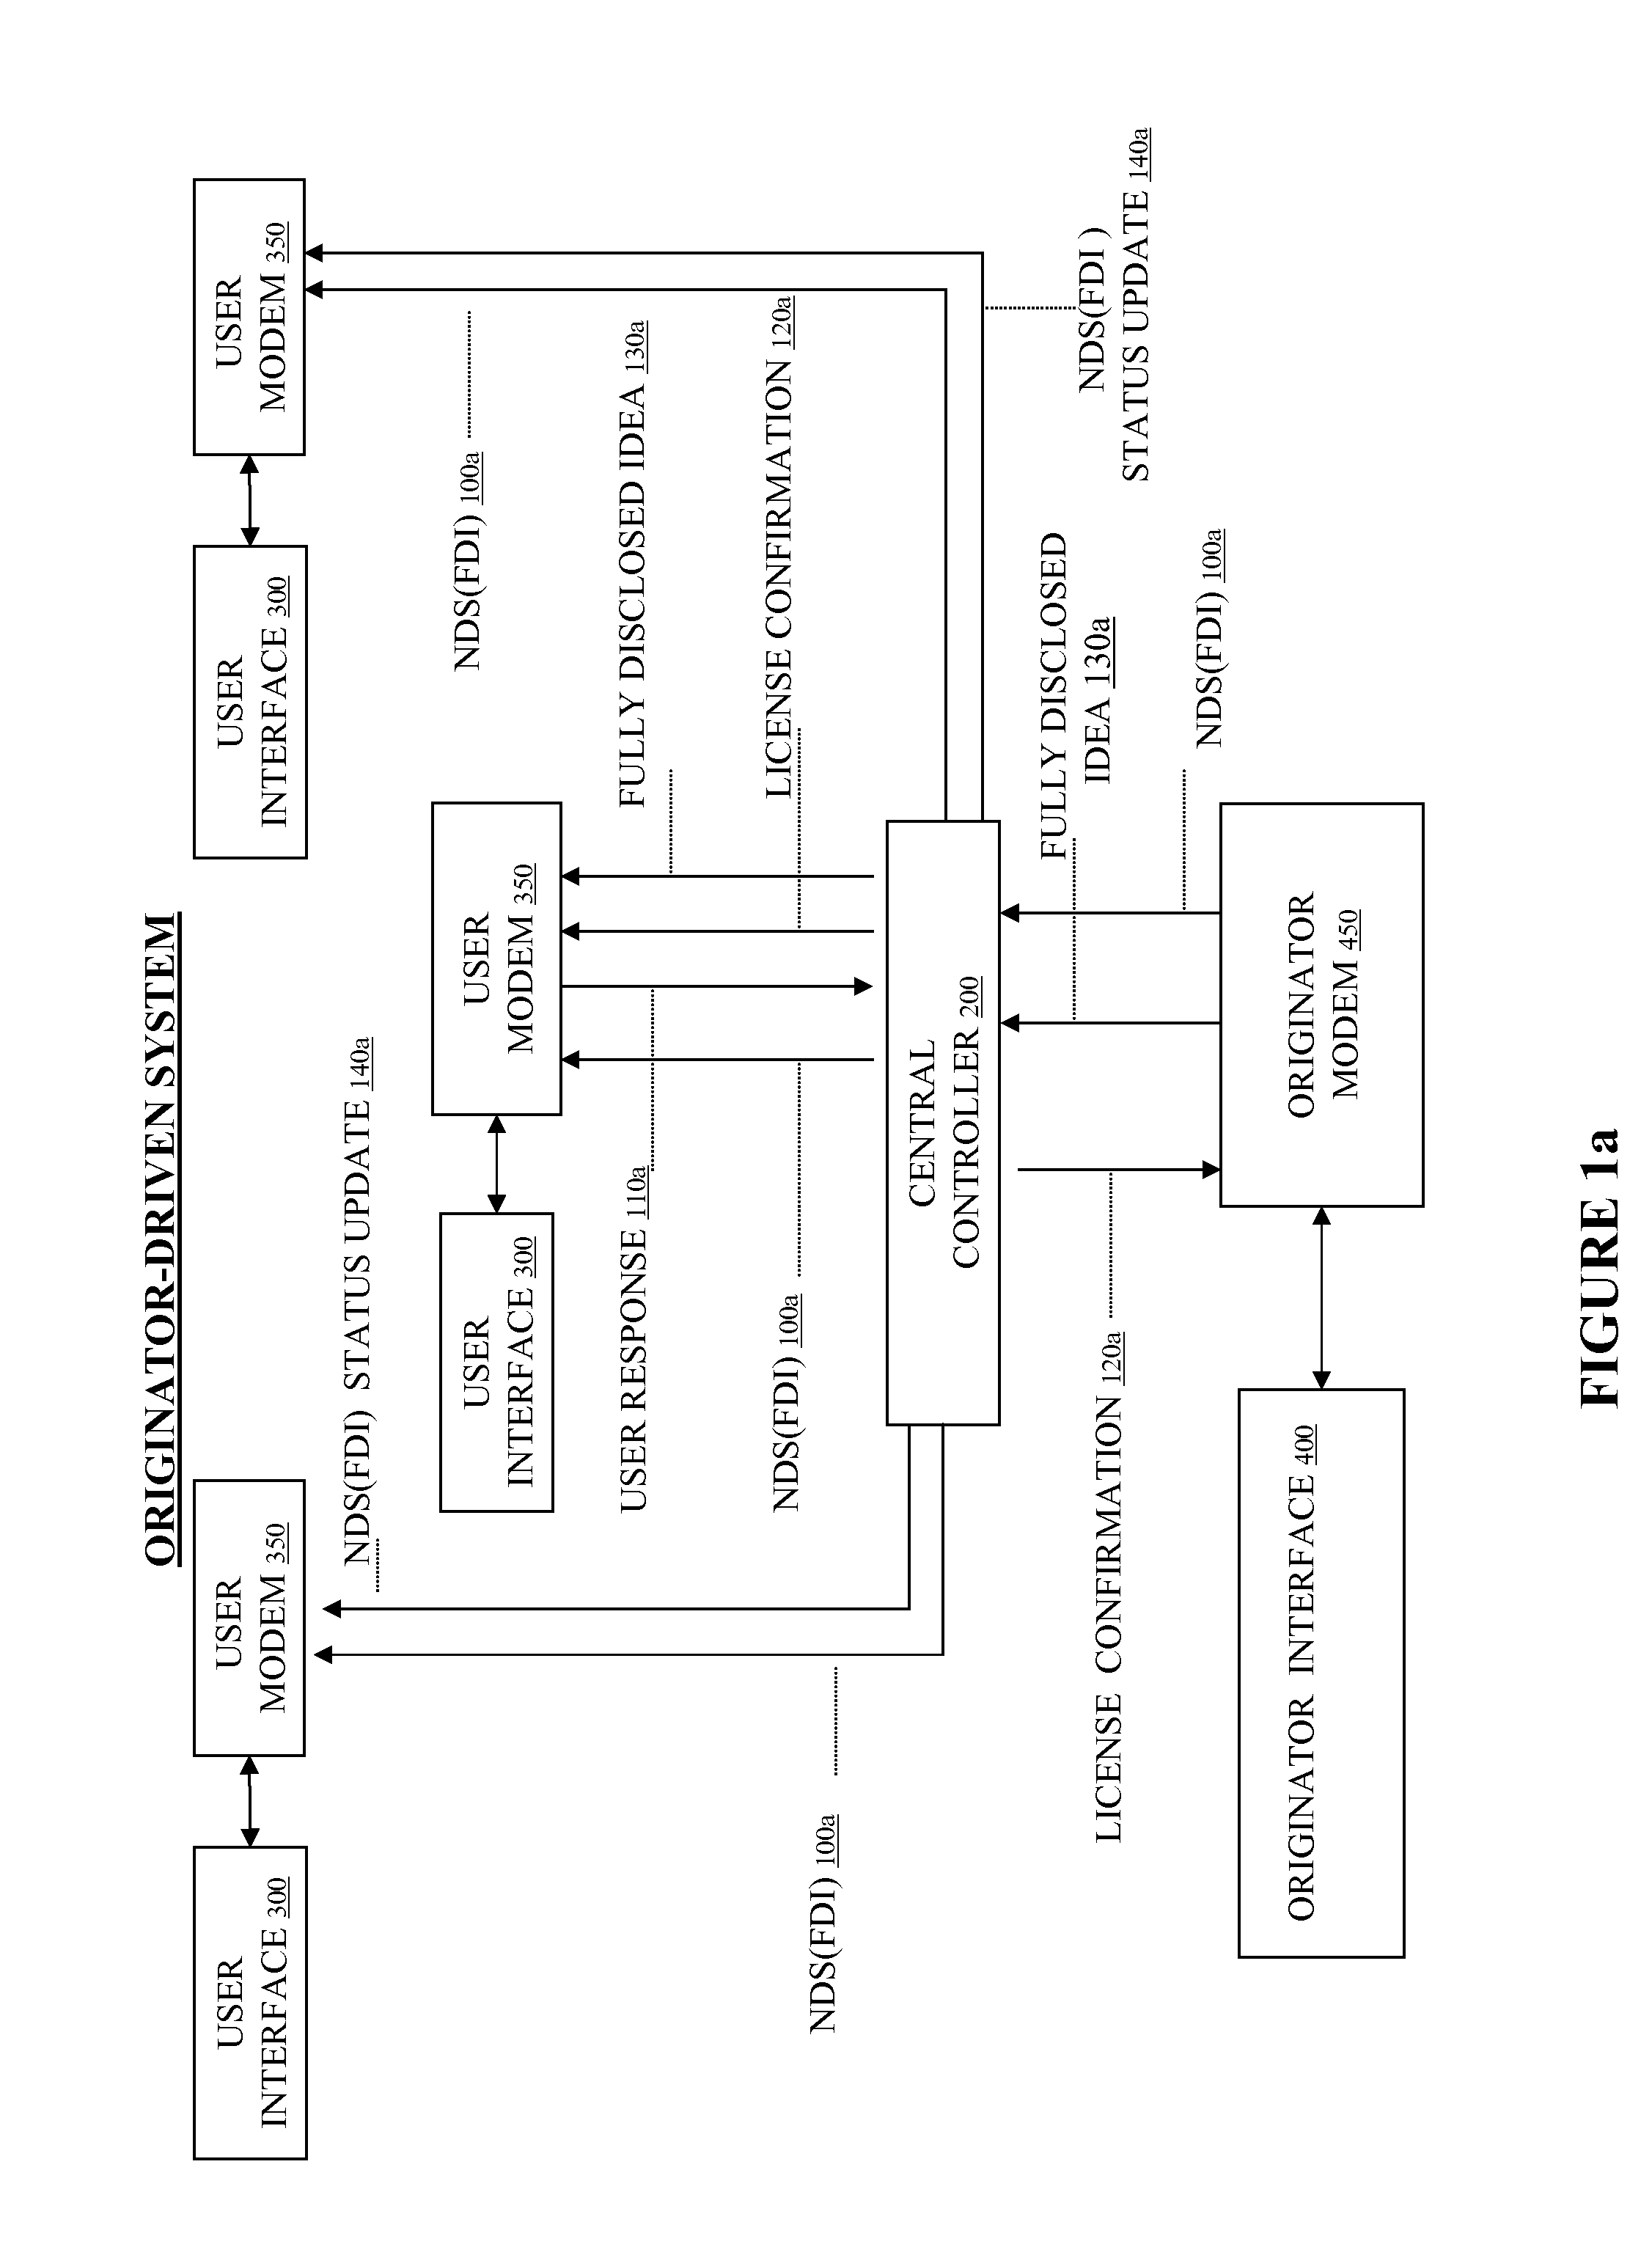 System and Method to Facilitate and Support Exchange of Proprietary Information